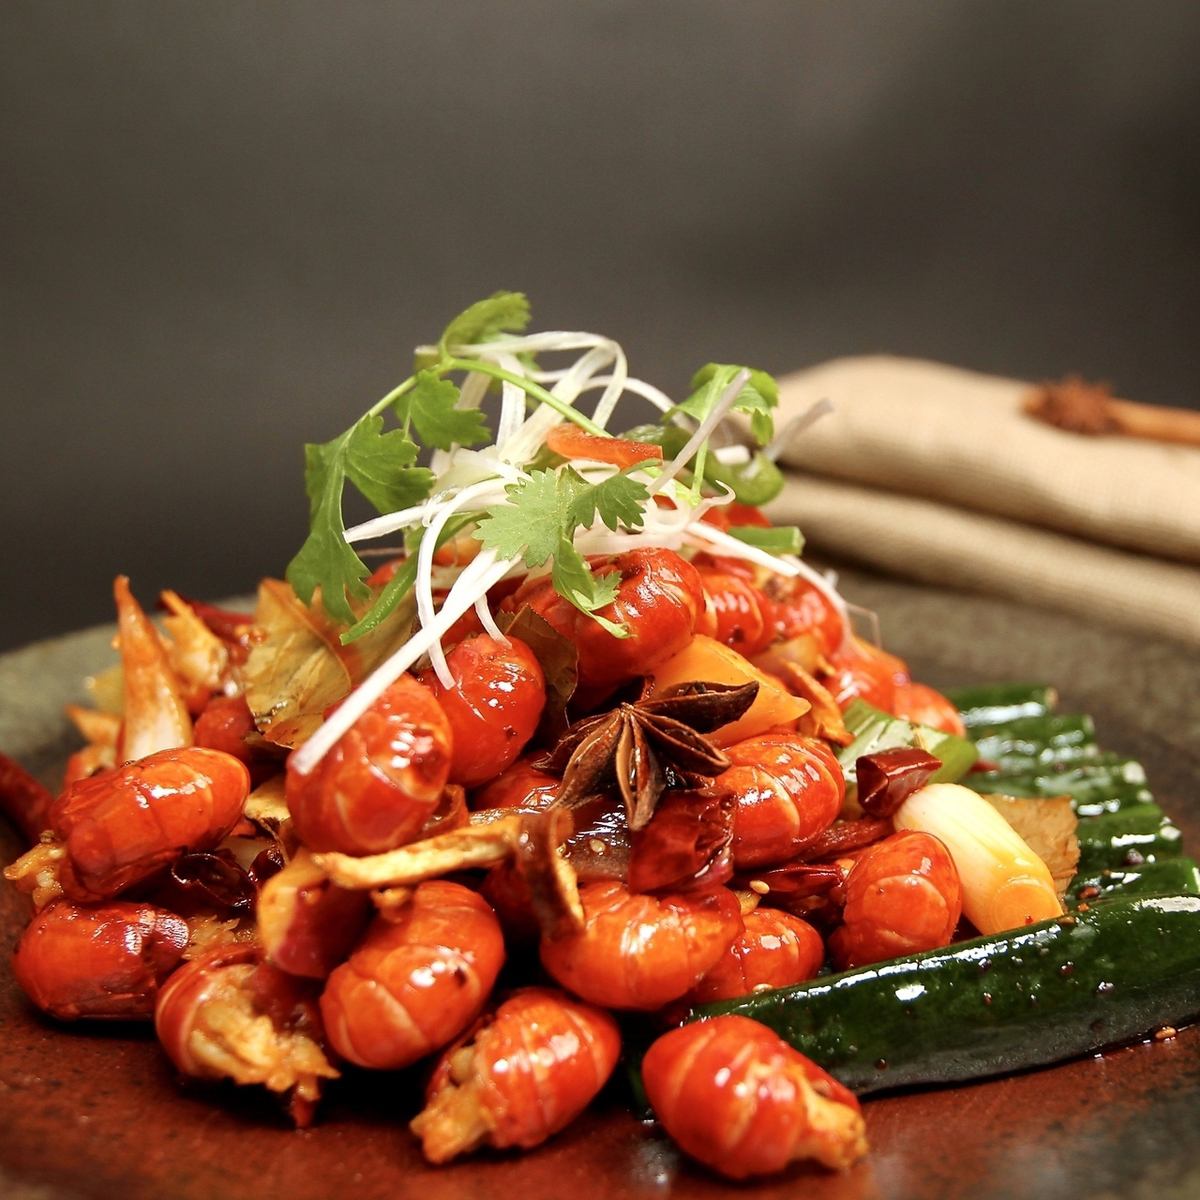 There are 6 kinds of popular crayfish dishes, so you won't get tired of eating them many times.